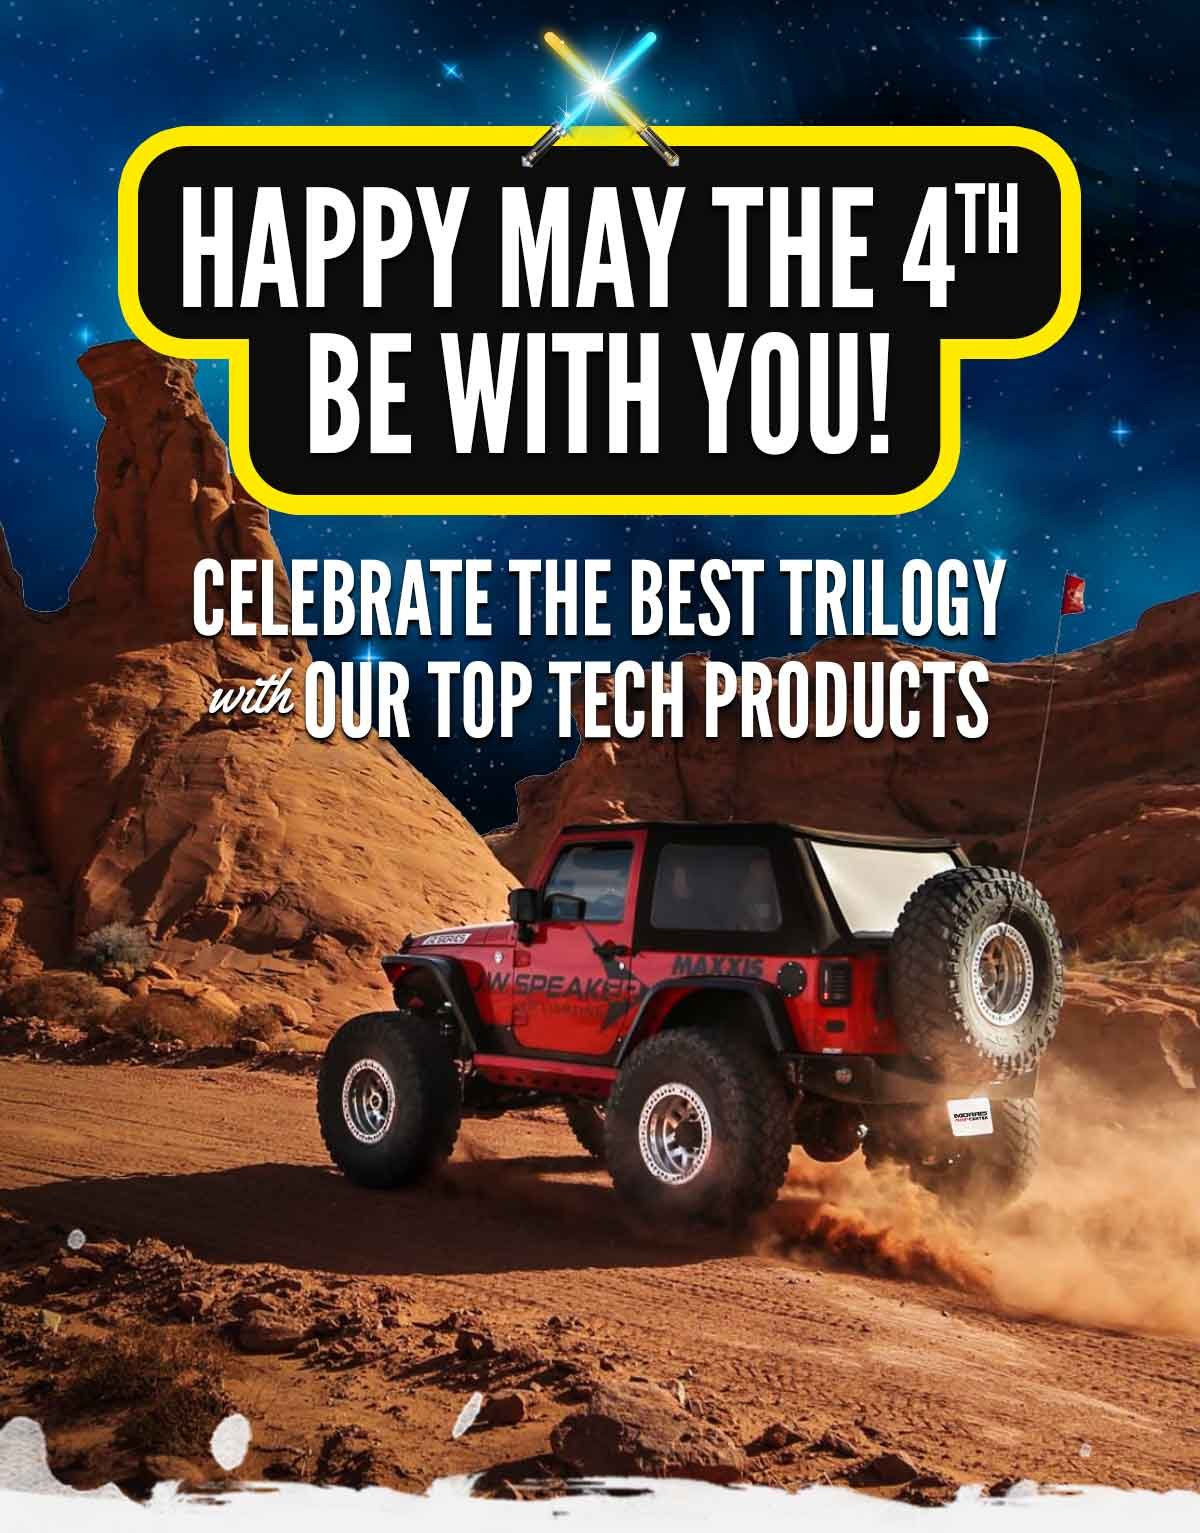 Happy May The 4th Be With You!  Celebrate The Best Trilogy With Our Top Tech Products